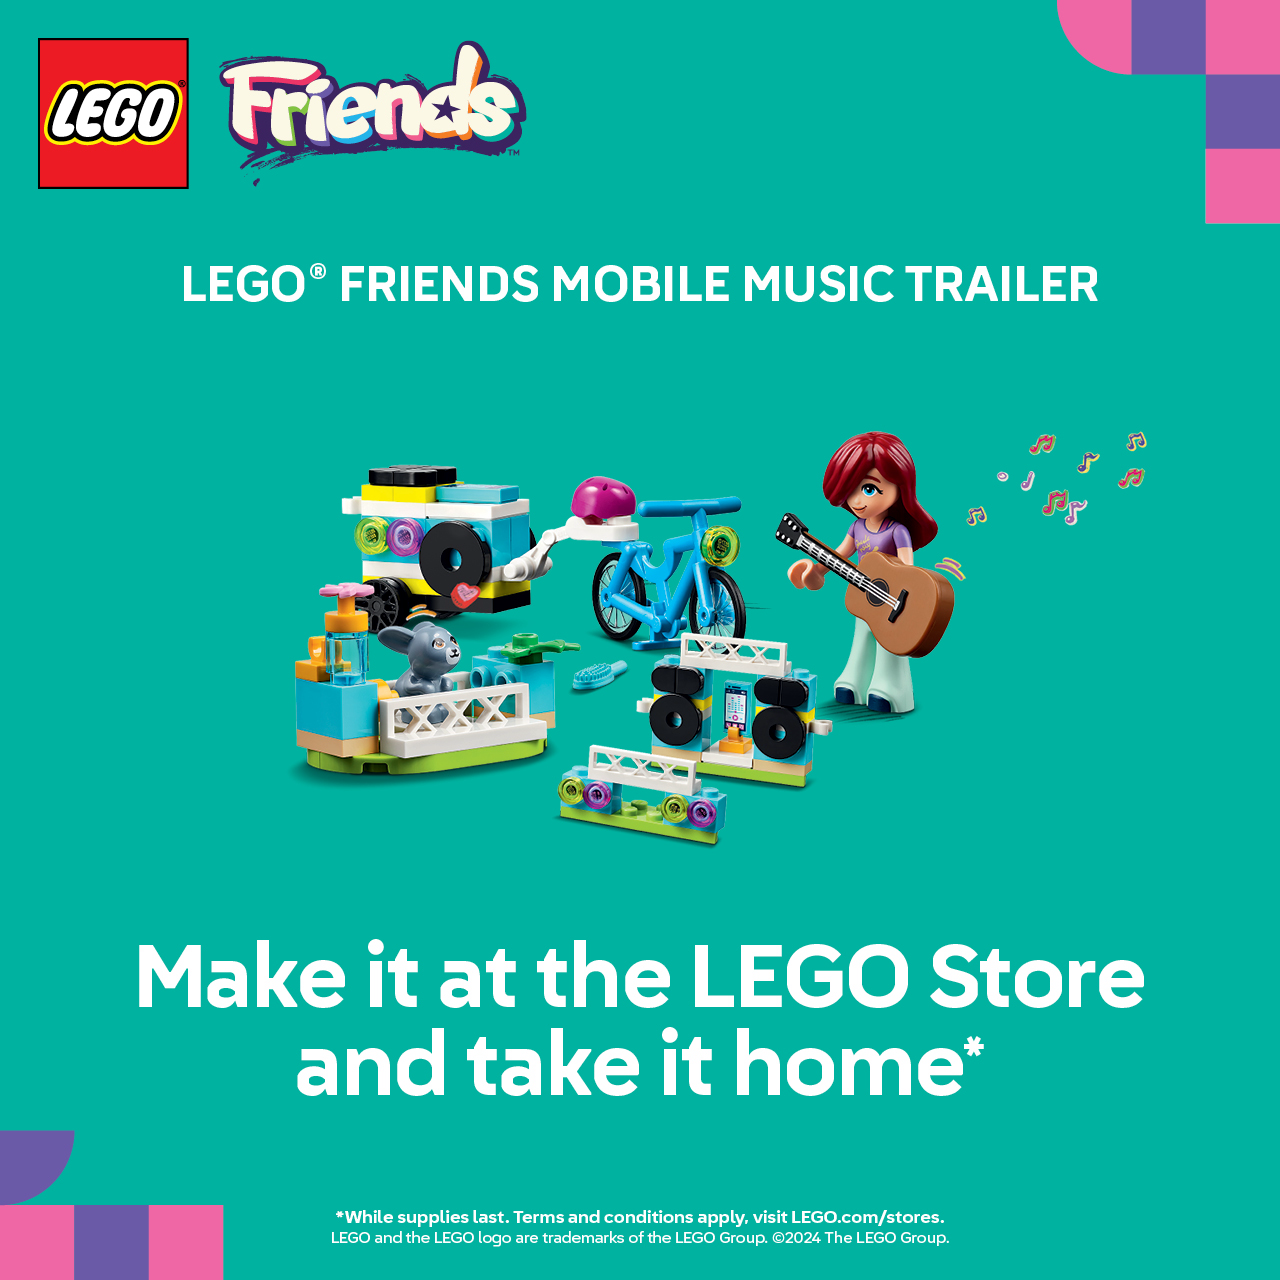 LEGO Campaign 40 Build a LEGO® Friends Mobile Music Trailer at The LEGO Store and take it home with you EN 1280x1280 1